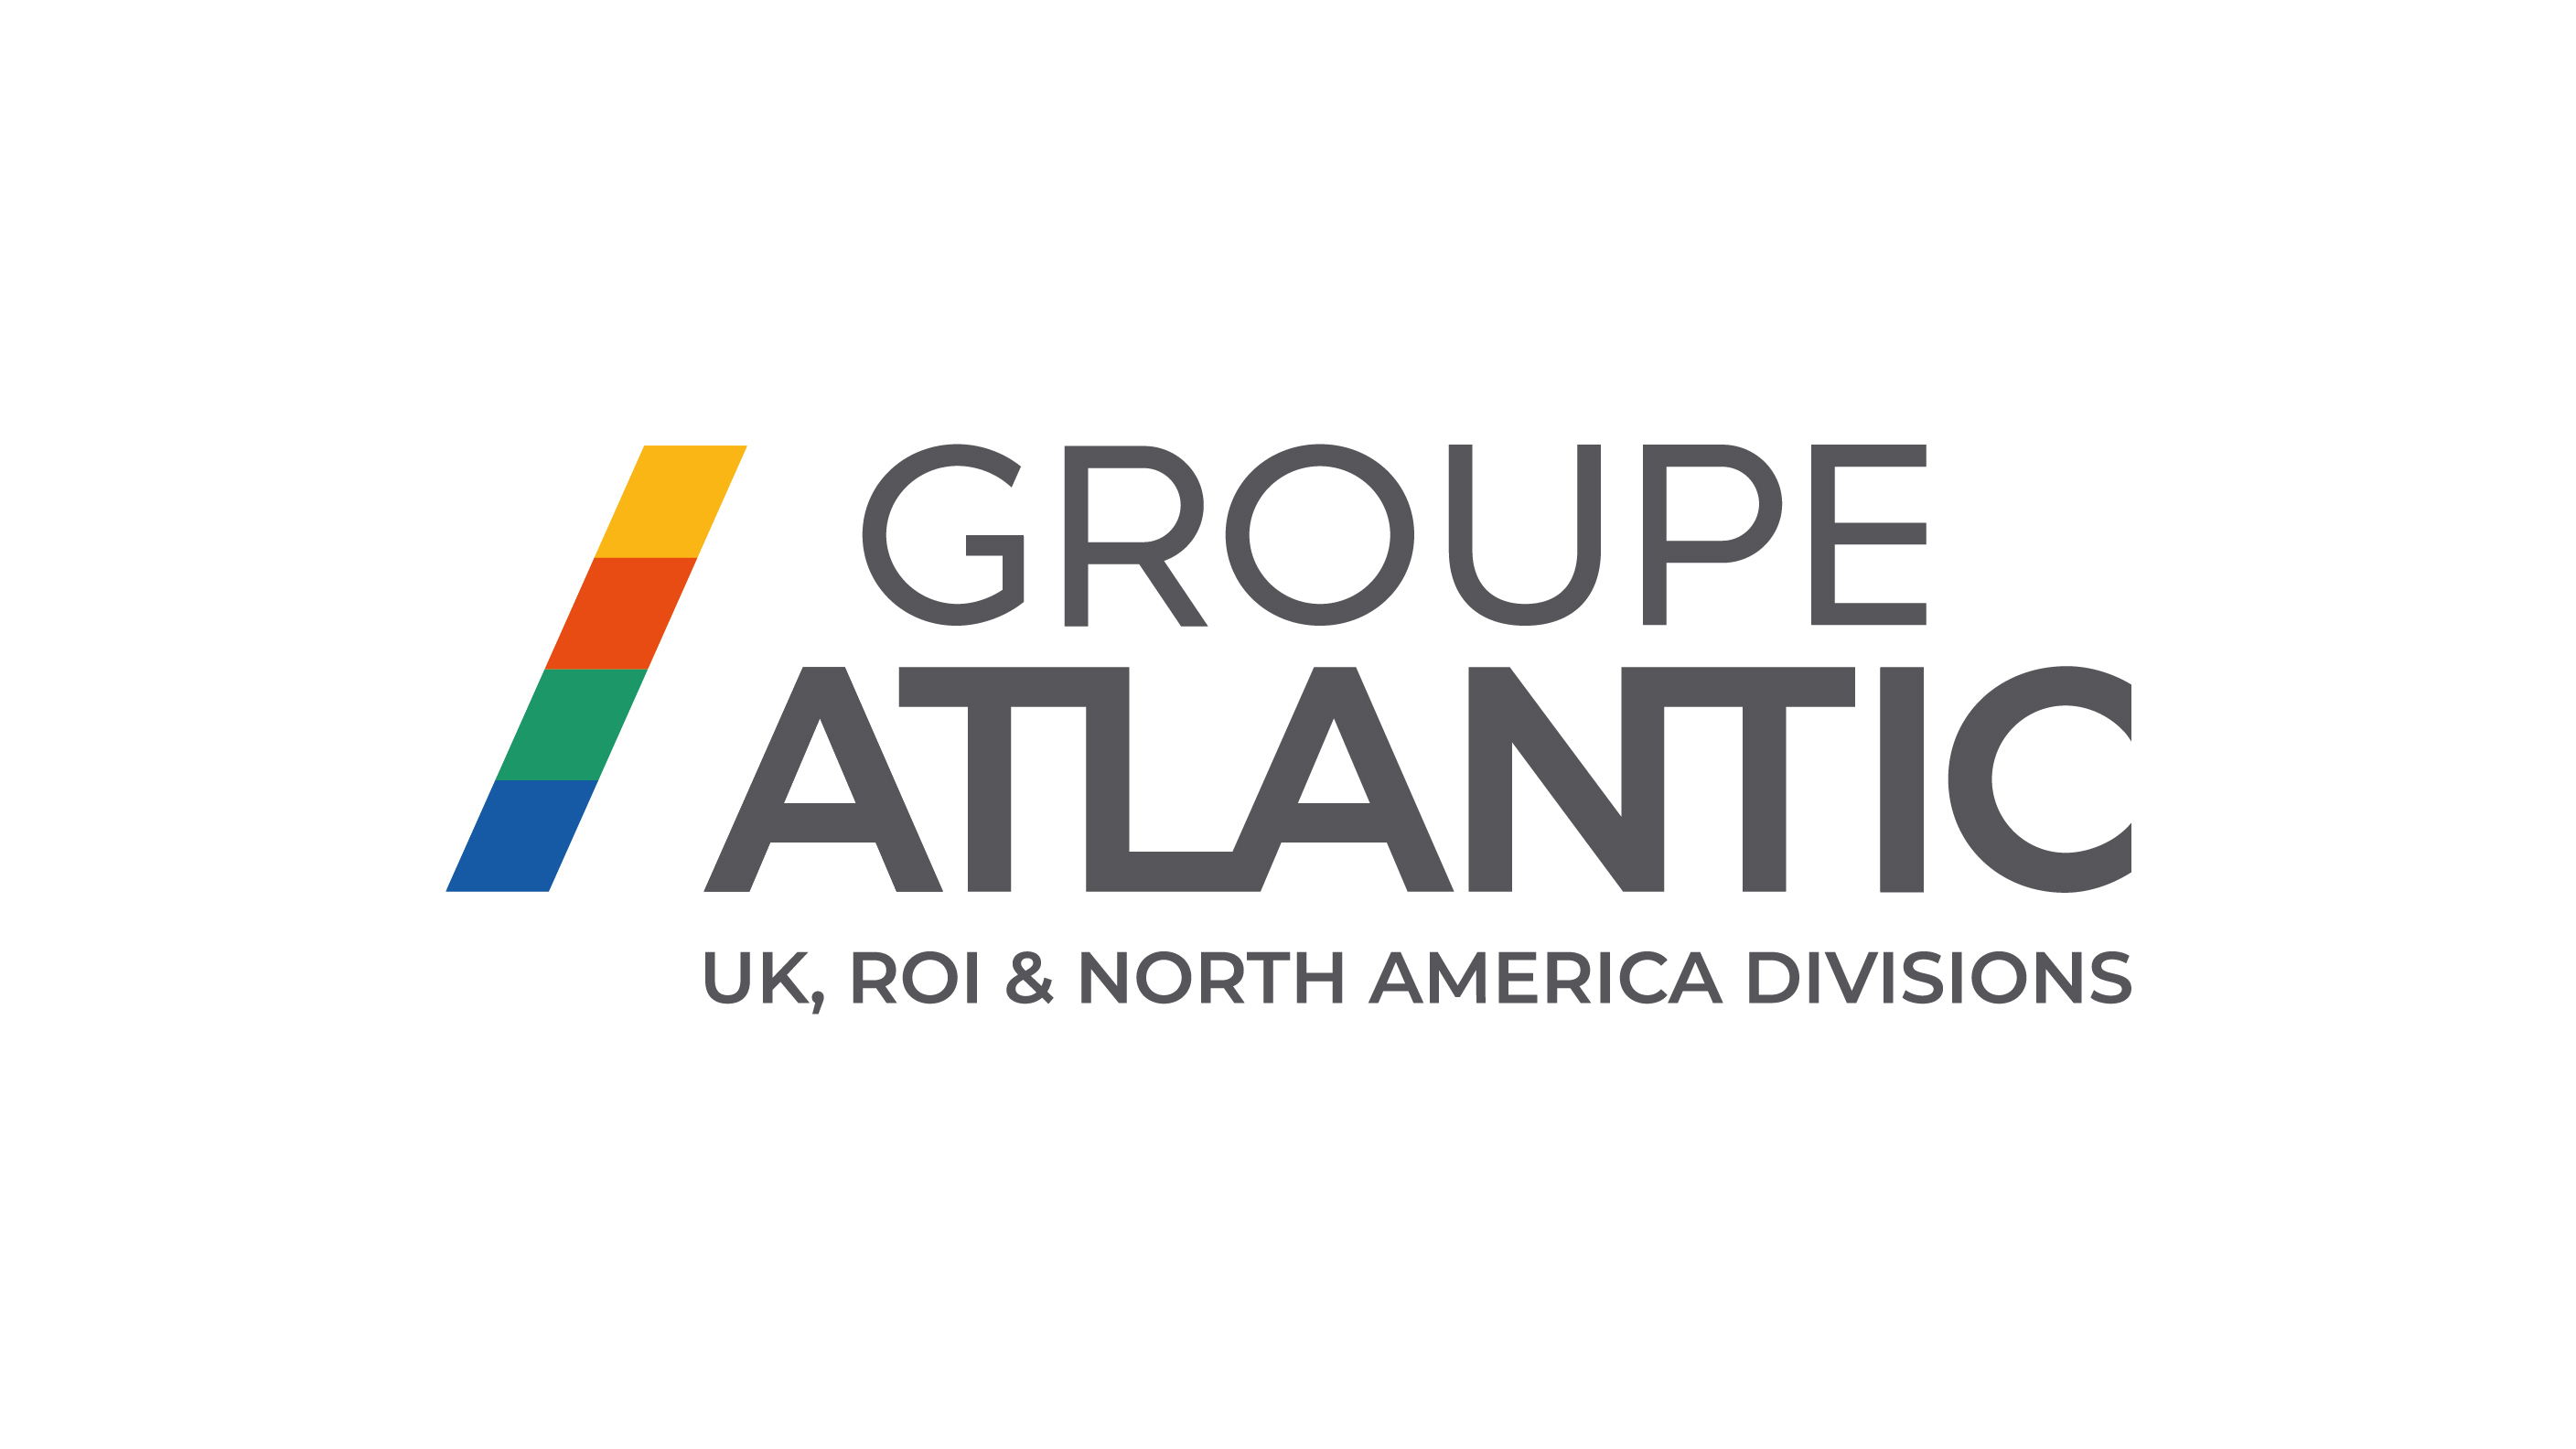 Groupe Atlantic, makes major investment in Clade Engineering Systems (Clade) for the UK, ROI & North America Division.